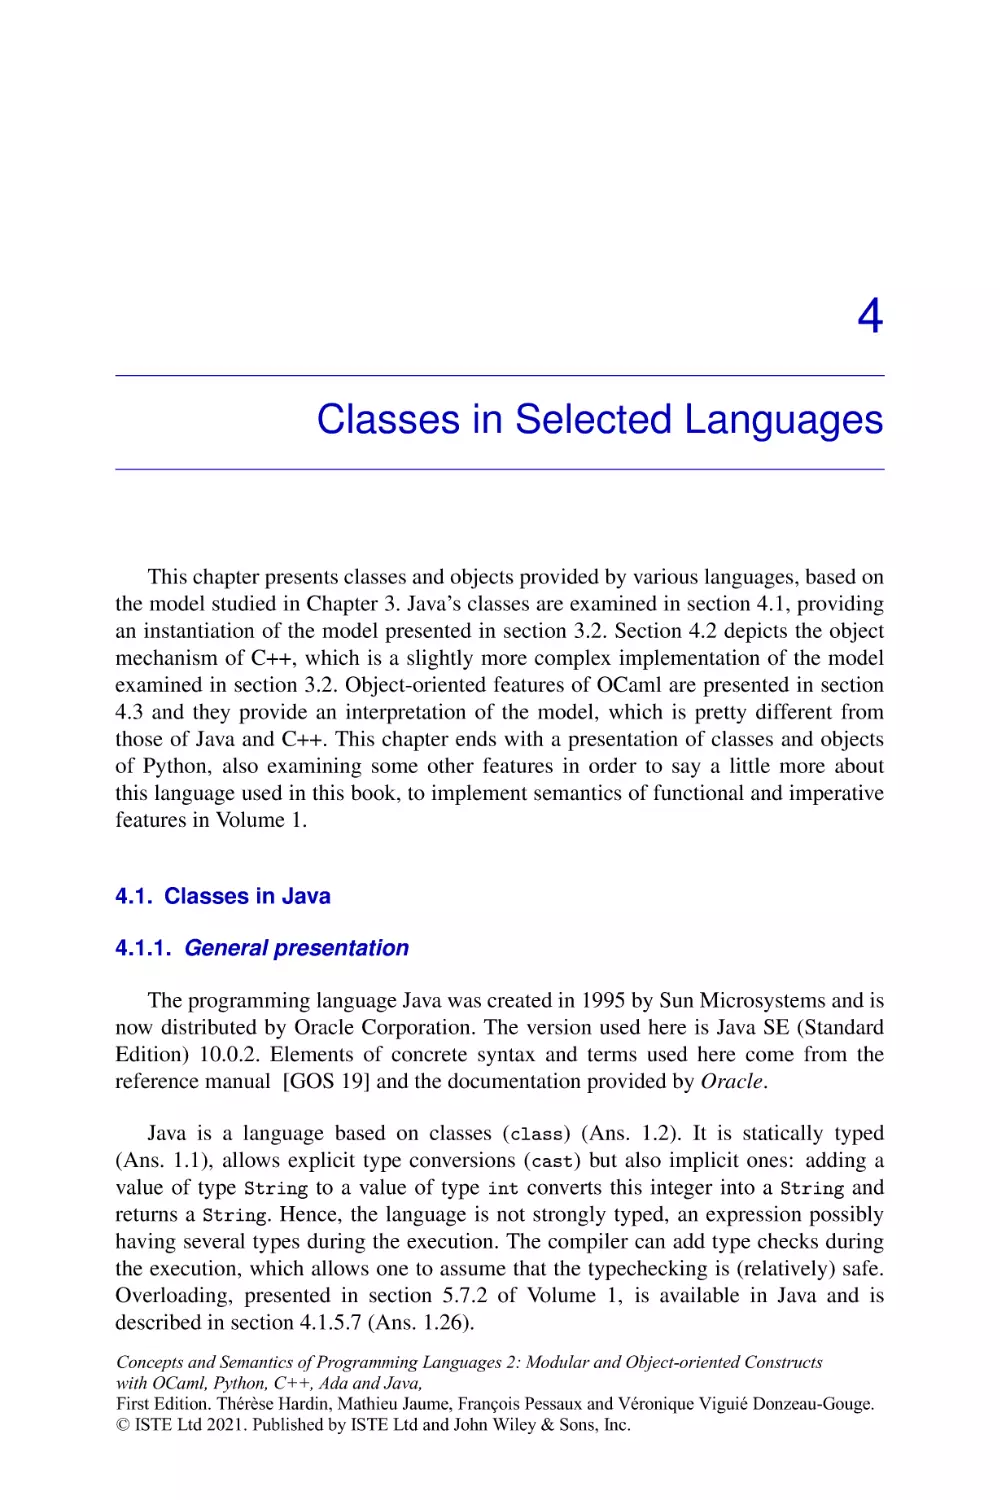 Chapter 4. Classes in Selected Languages
4.1. Classes in Java
4.1.1. General presentation